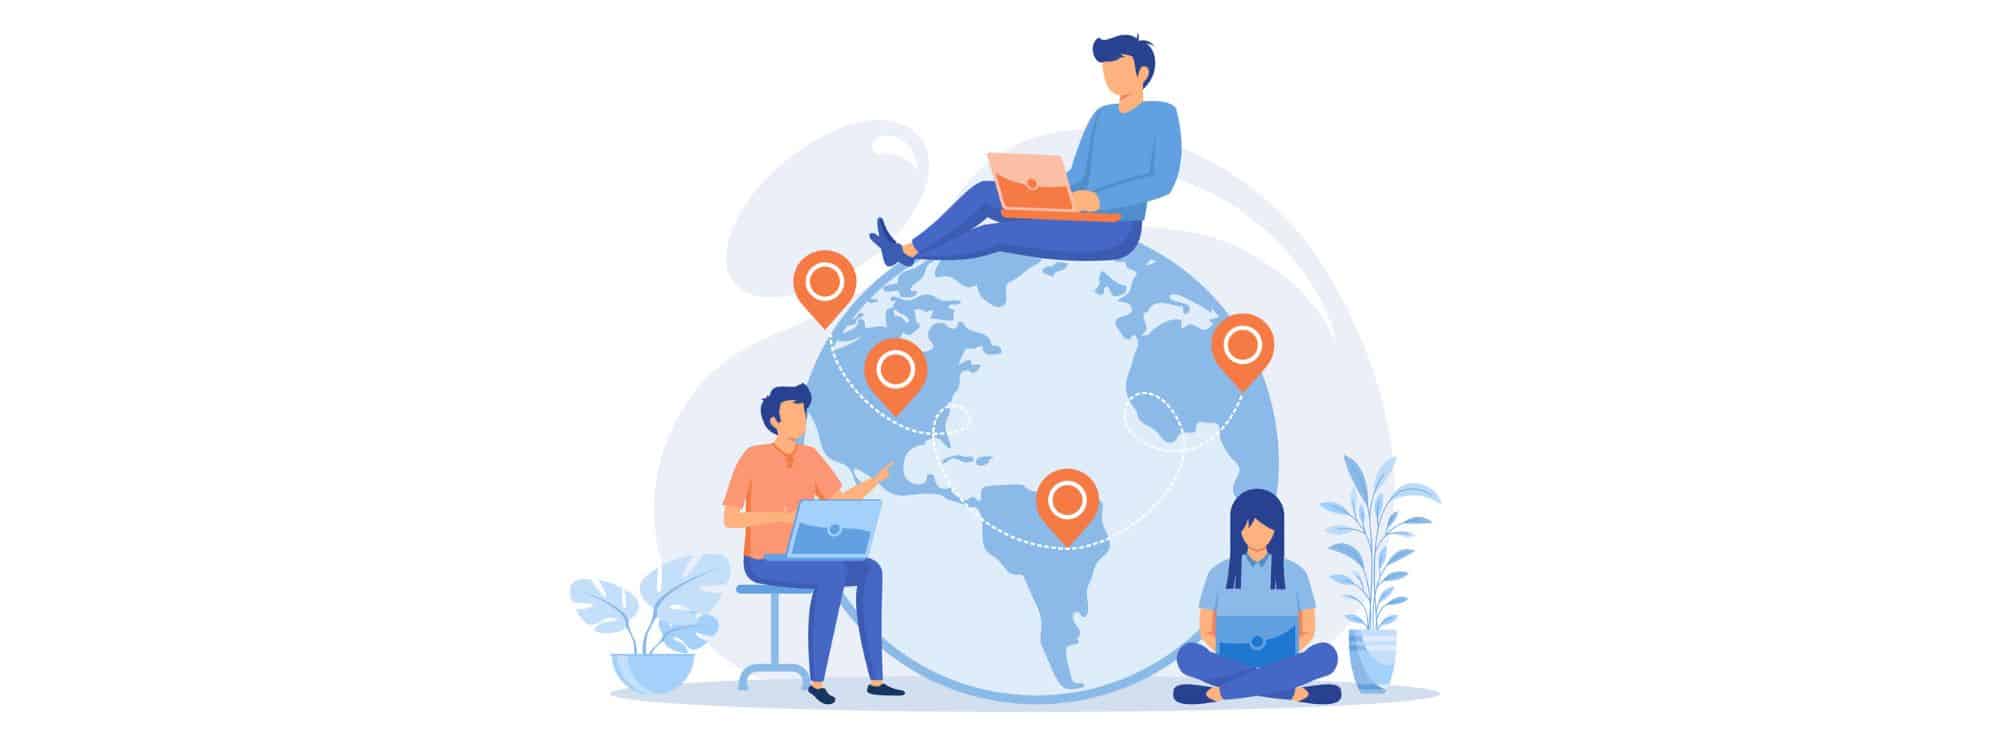 illustration of three workers using their computers and being connected from around the world